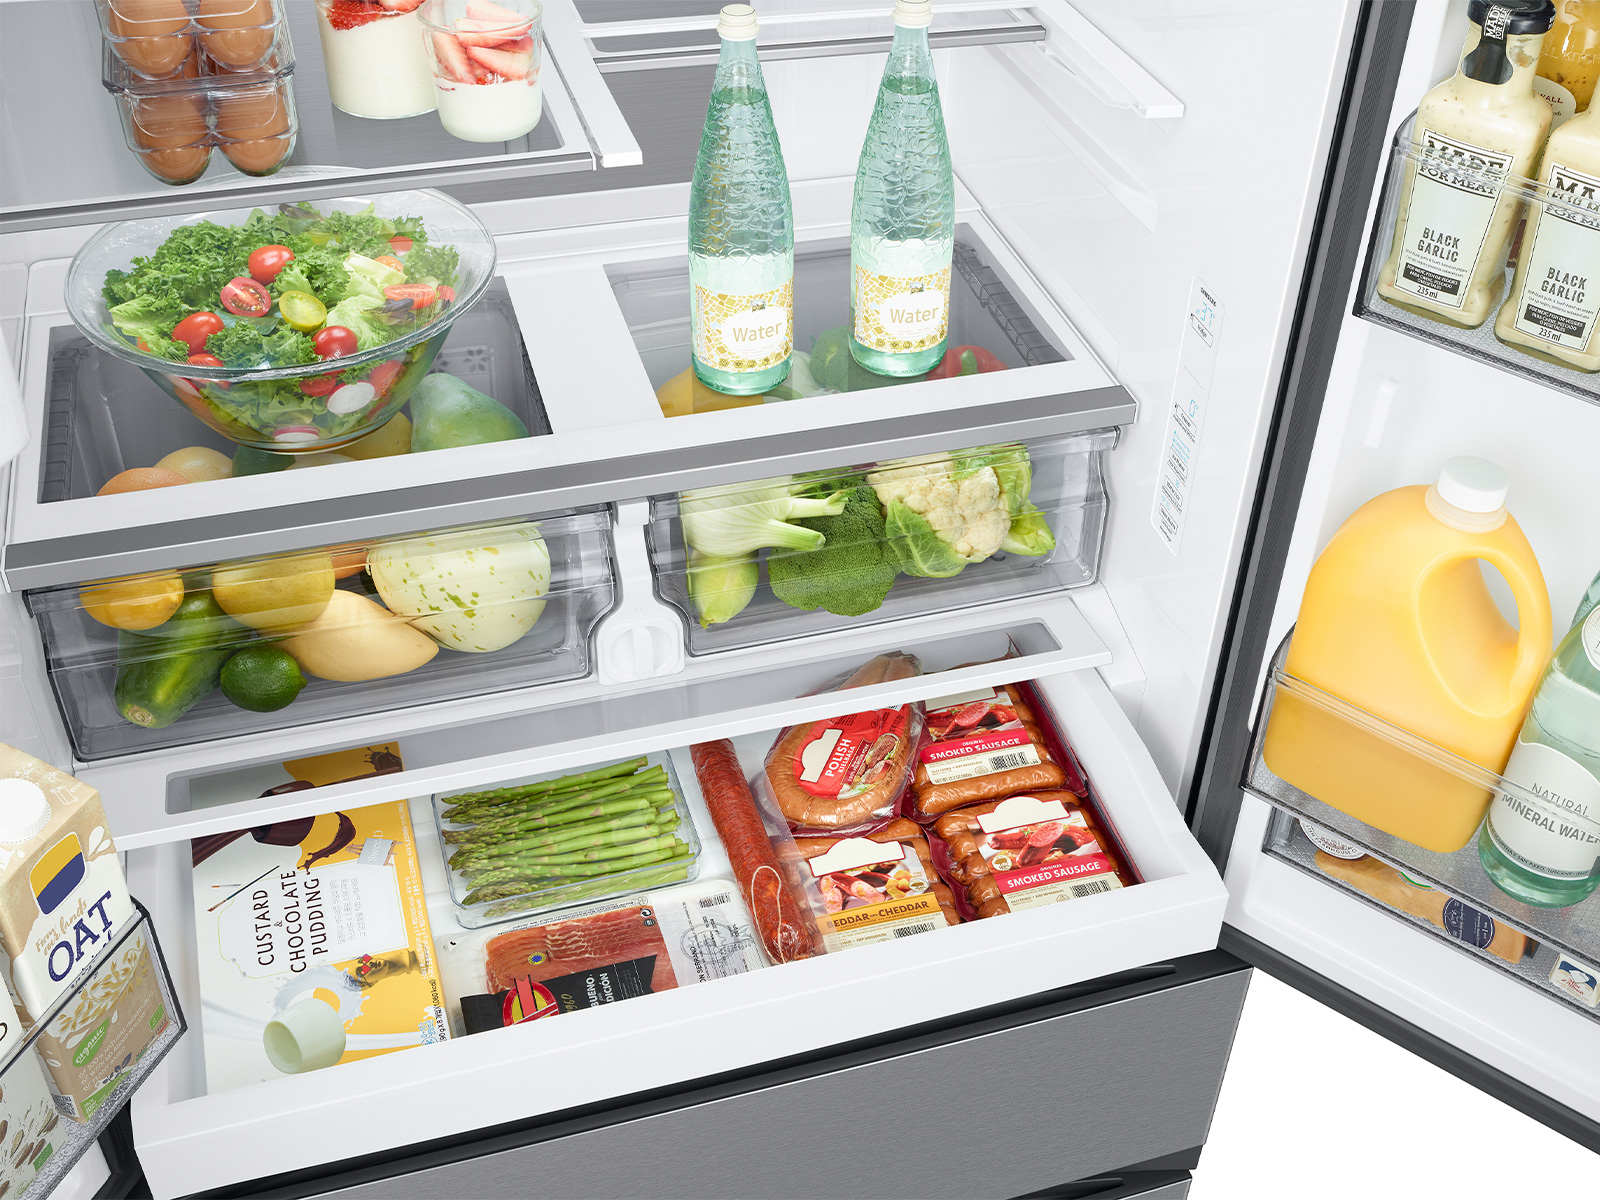 Thumbnail image of 25 cu. ft. Mega Capacity Counter Depth 4-Door French Door Refrigerator with Four Types of Ice in Stainless Steel